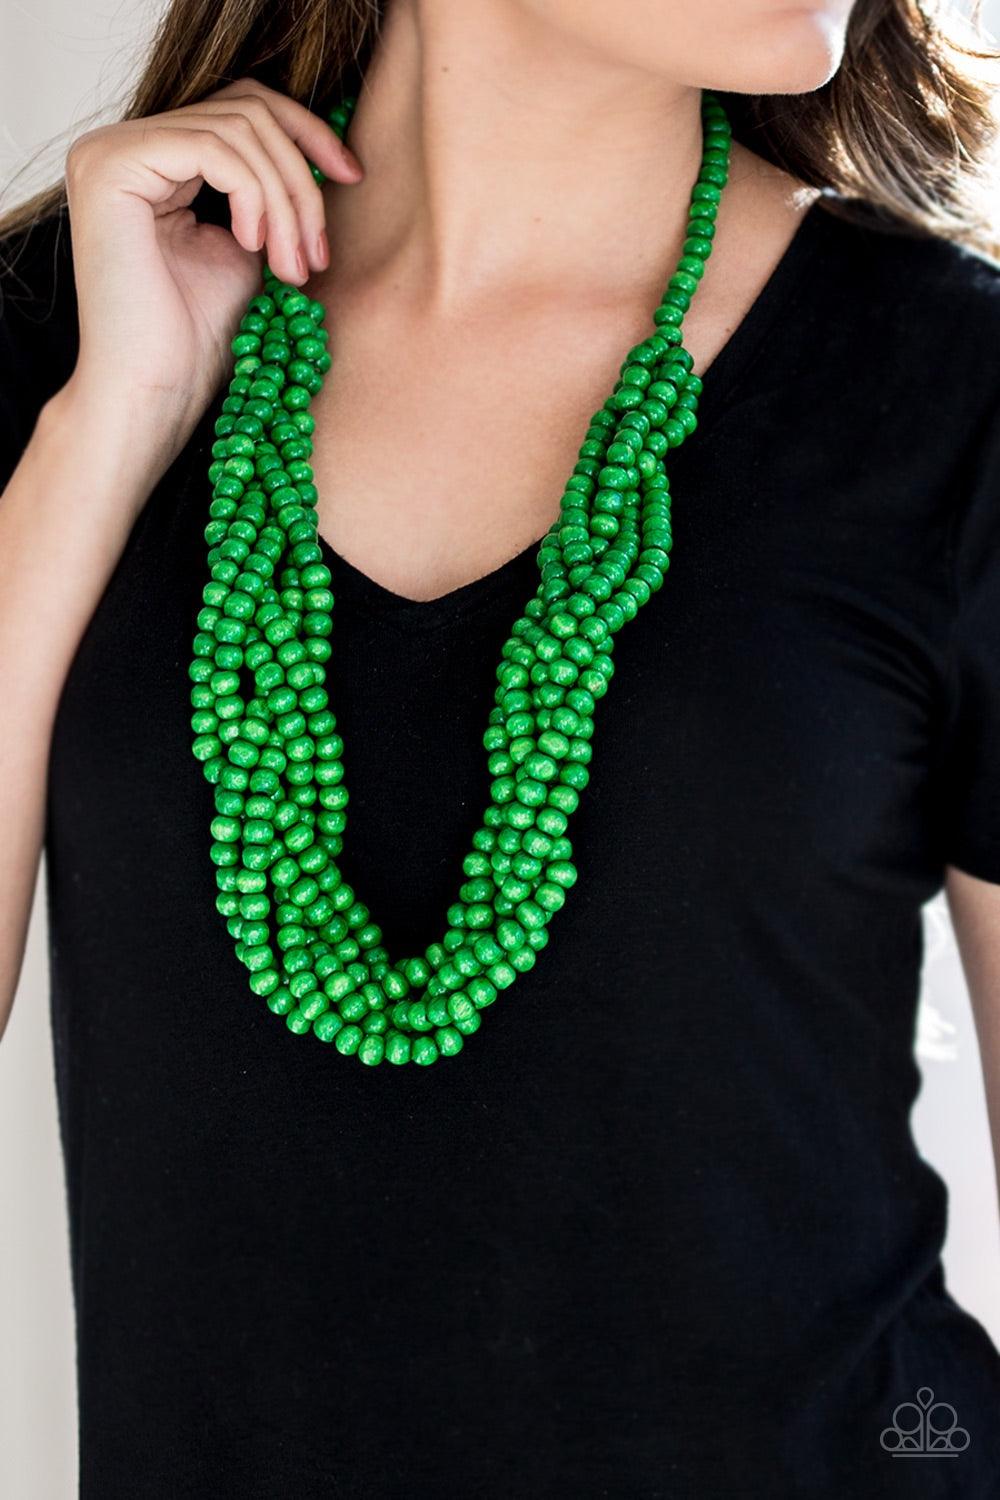 Paparazzi Accessories Tahiti Tropic - Green Brushed in a refreshing green finish, strands of vivacious wooden beads subtly twist across the chest for a summery look. Jewelry